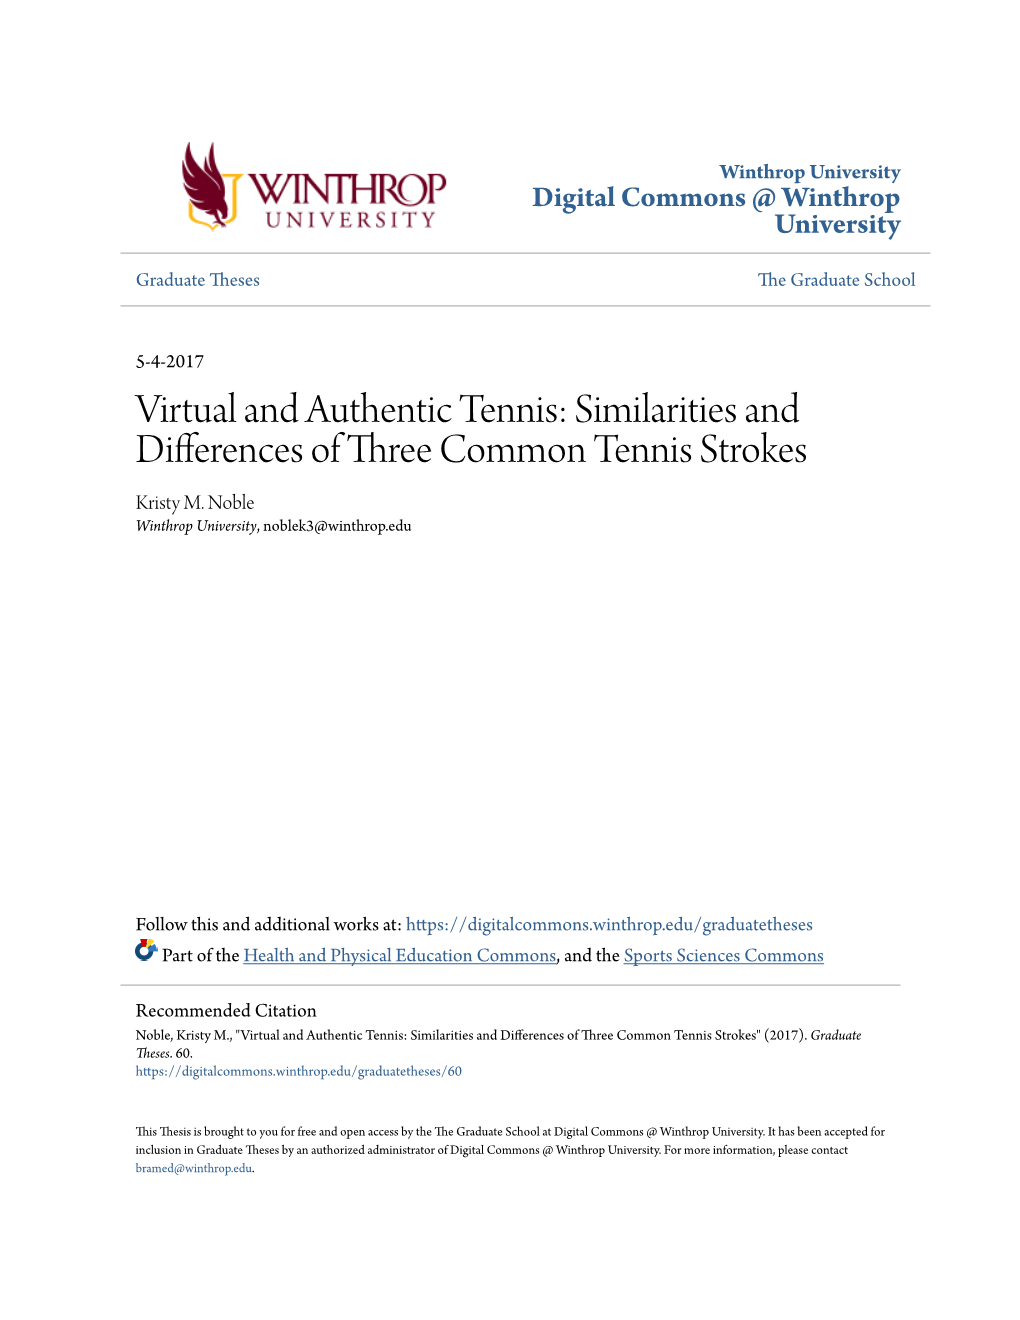 Similarities and Differences of Three Common Tennis Strokes Kristy M